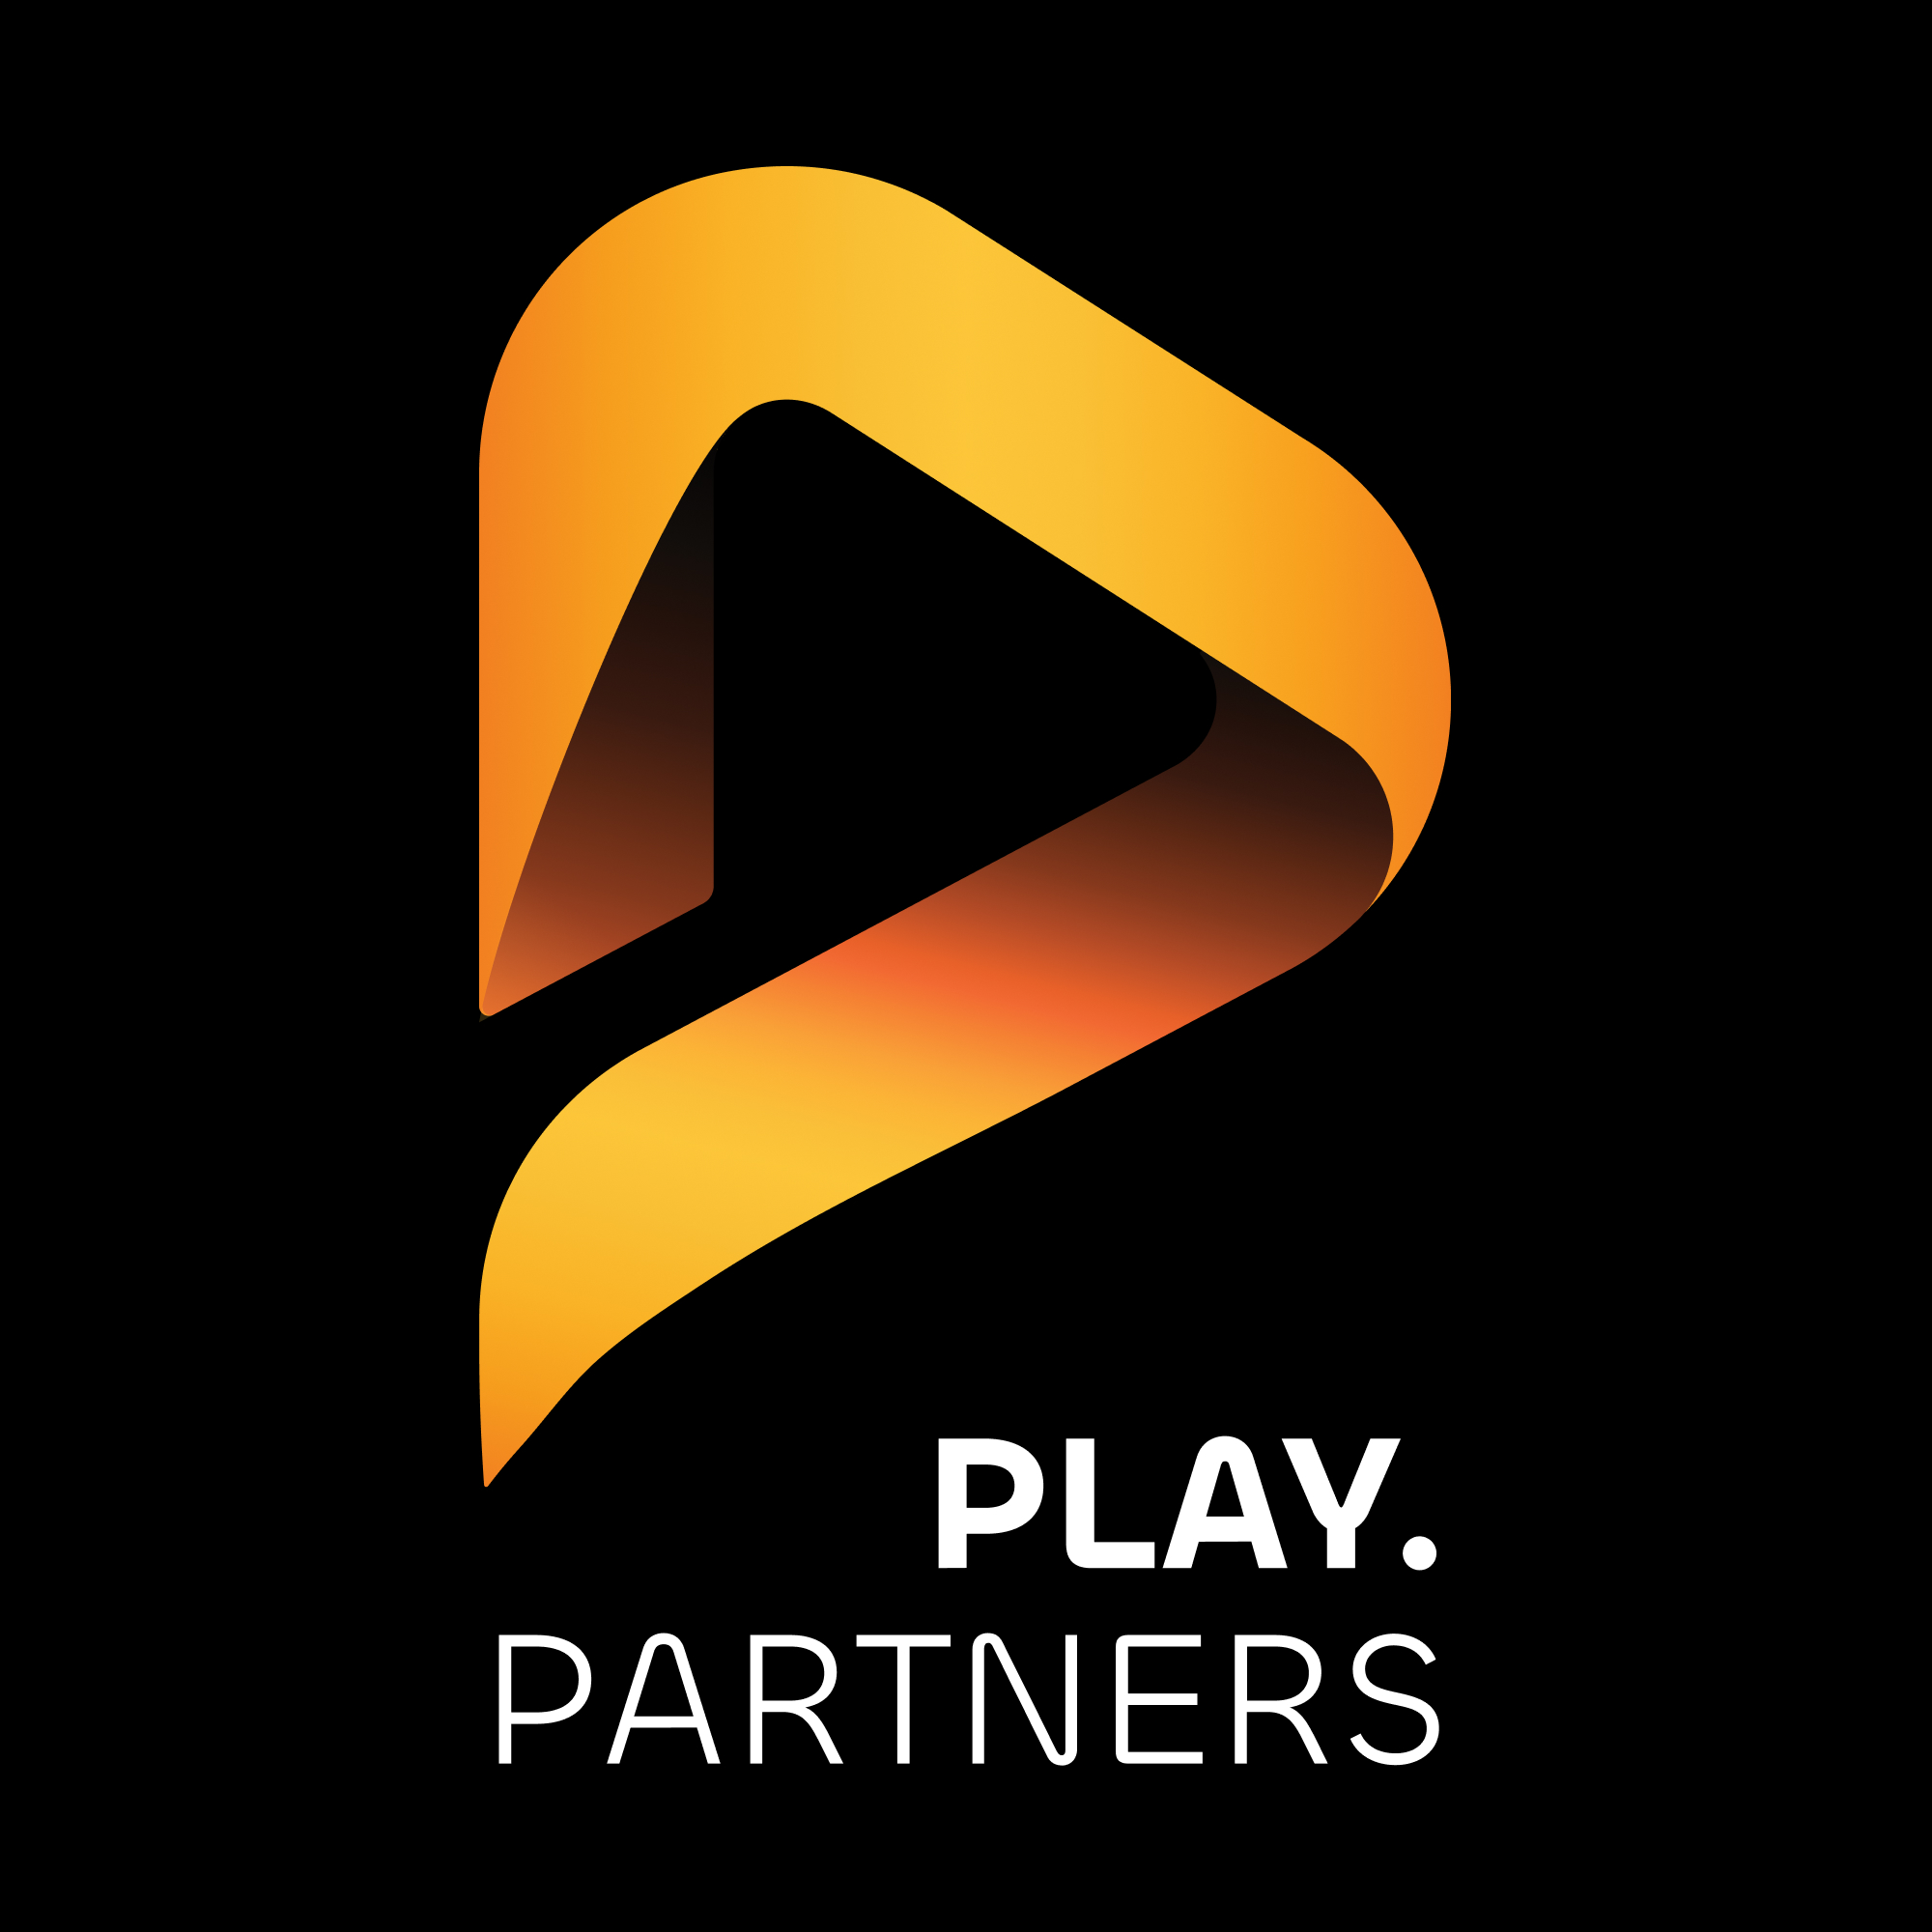 PLAY.PARTNERS